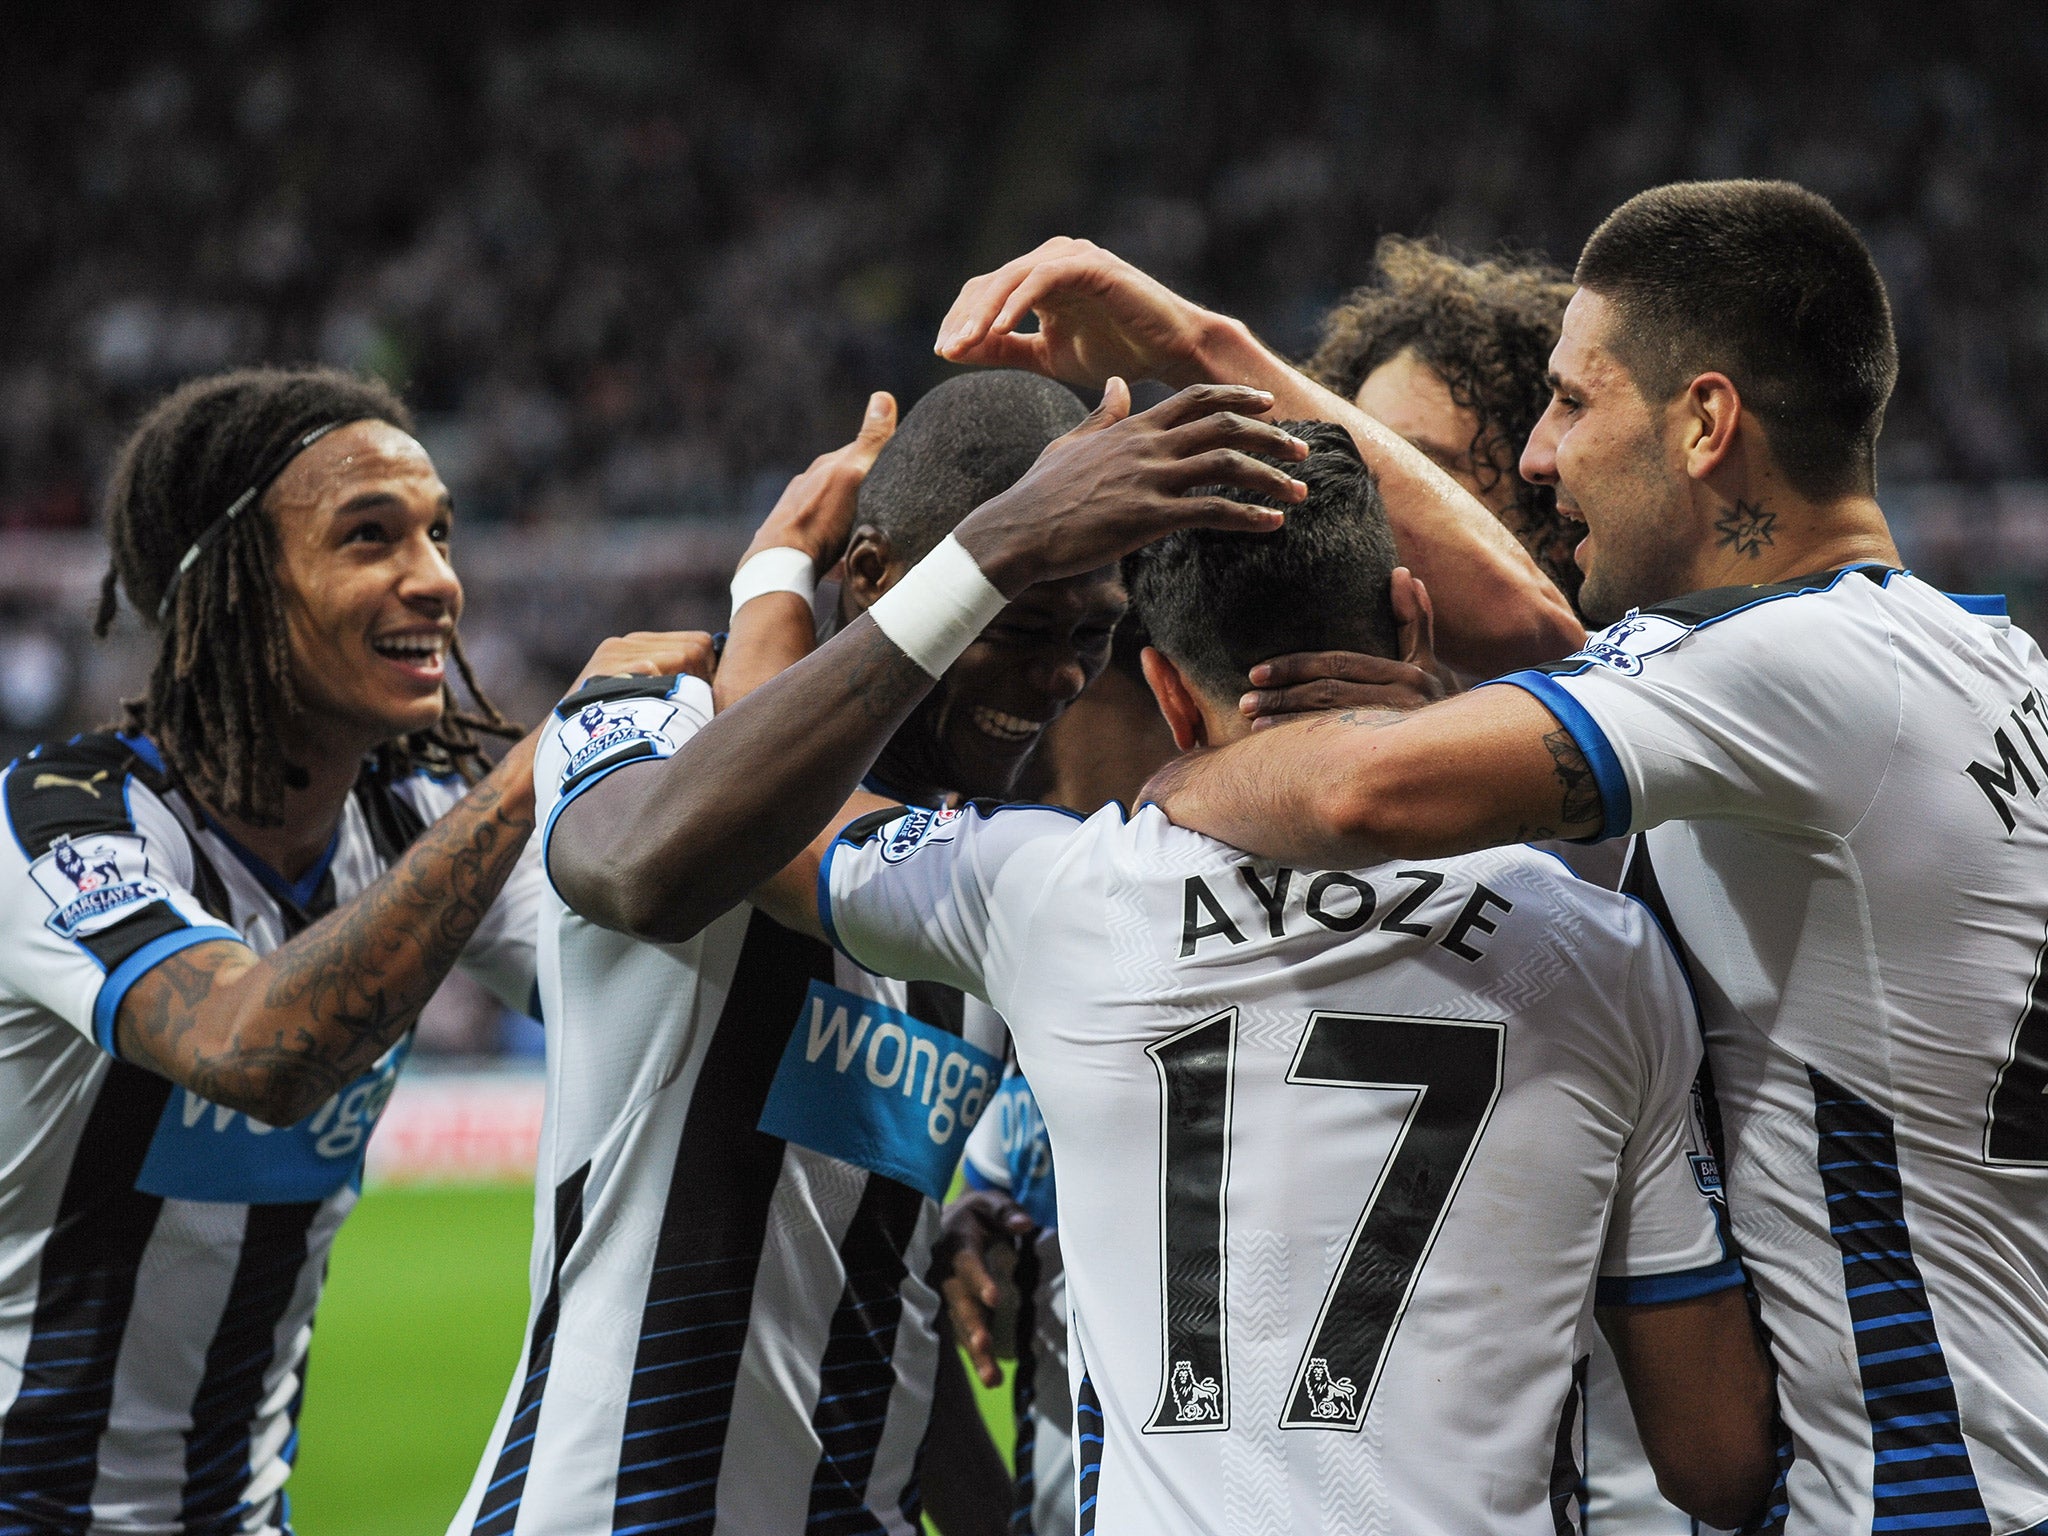 Newcastle's spirited performance was not enough to take all three points